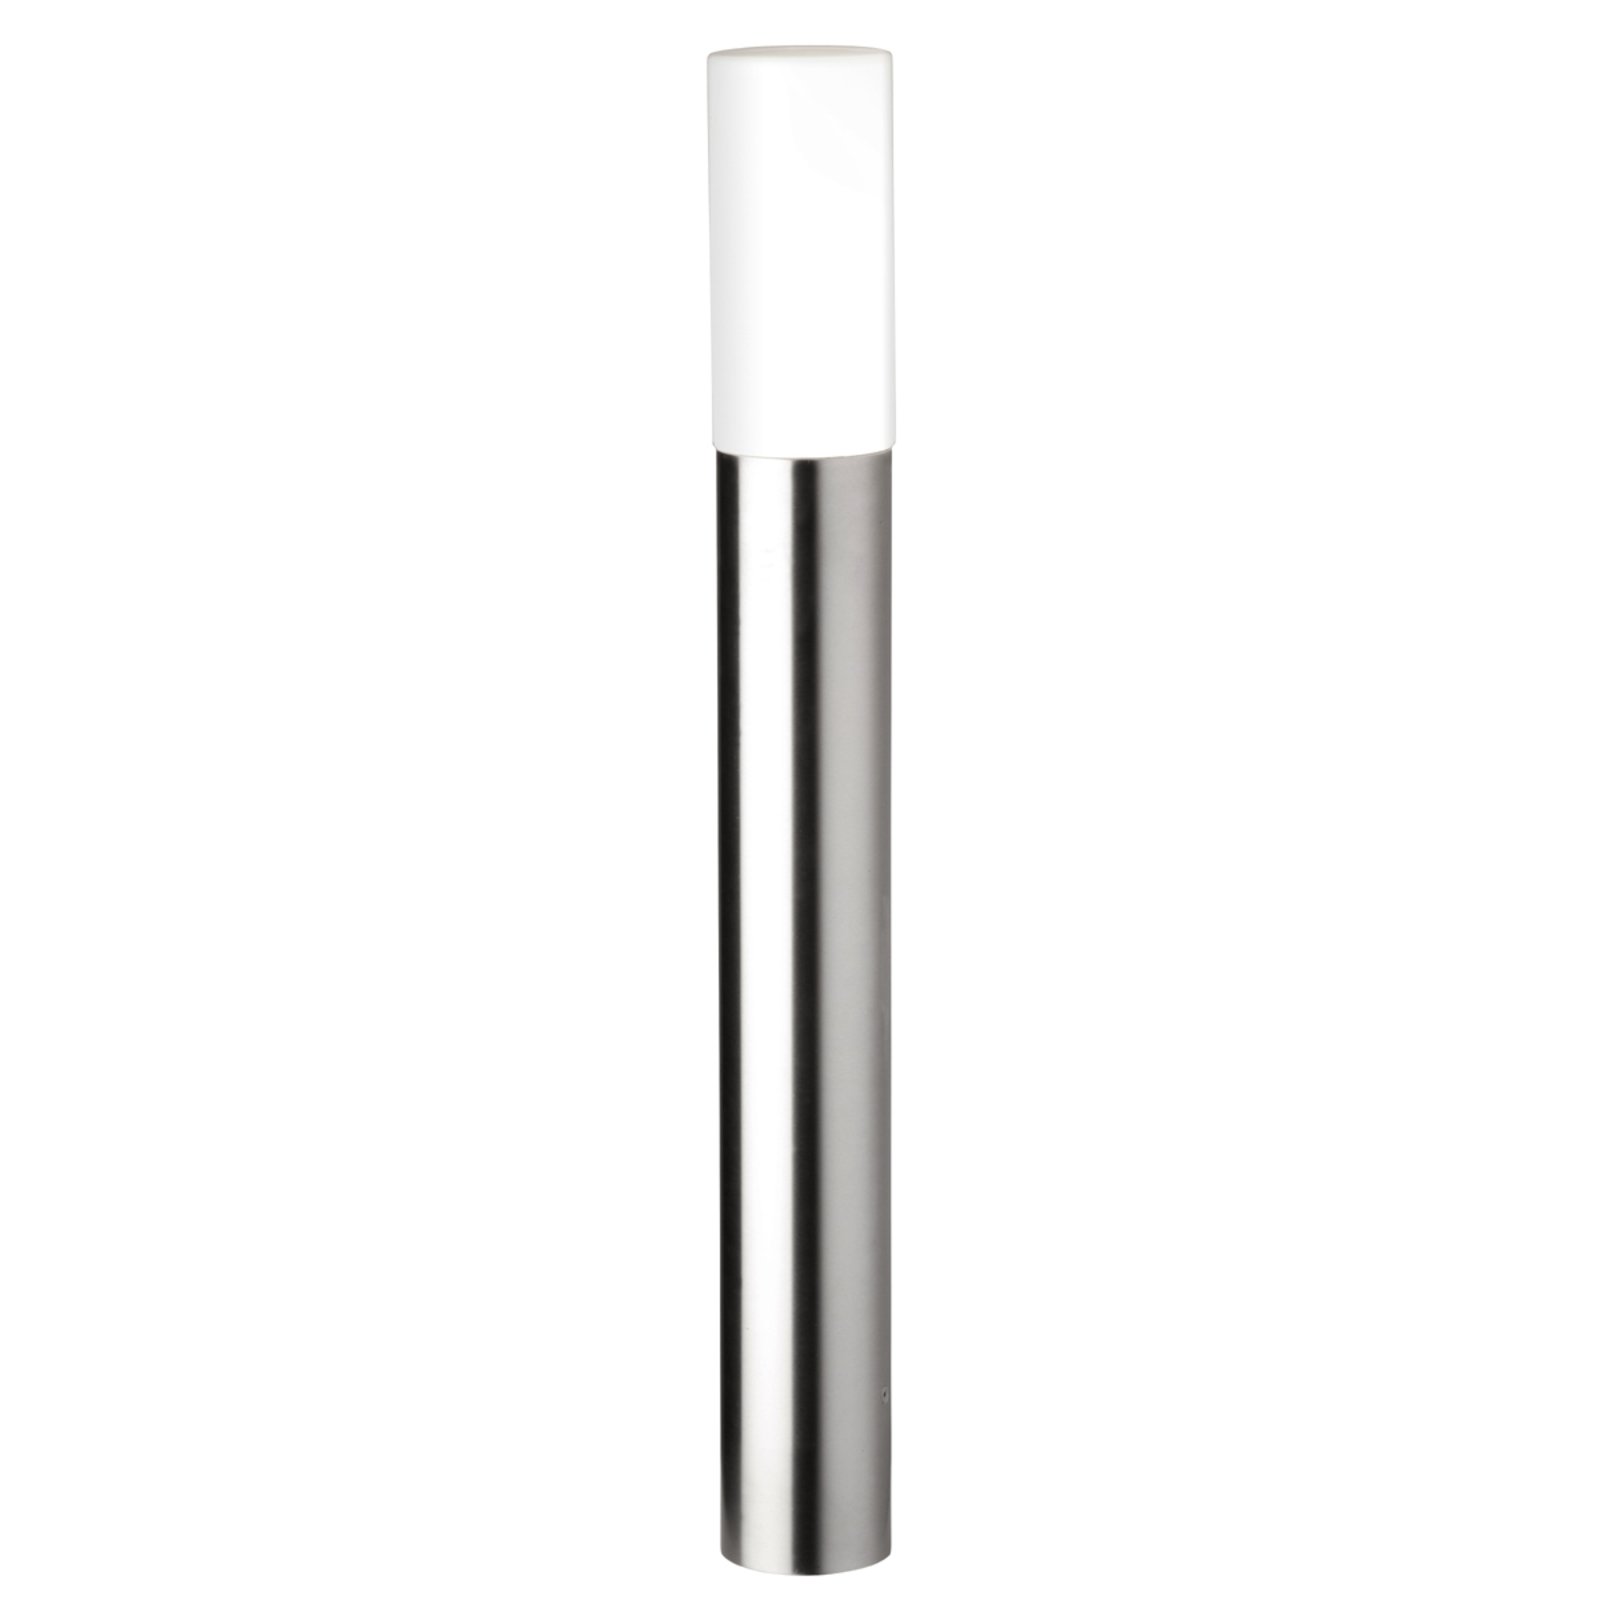 Polos attractive path light, stainless steel